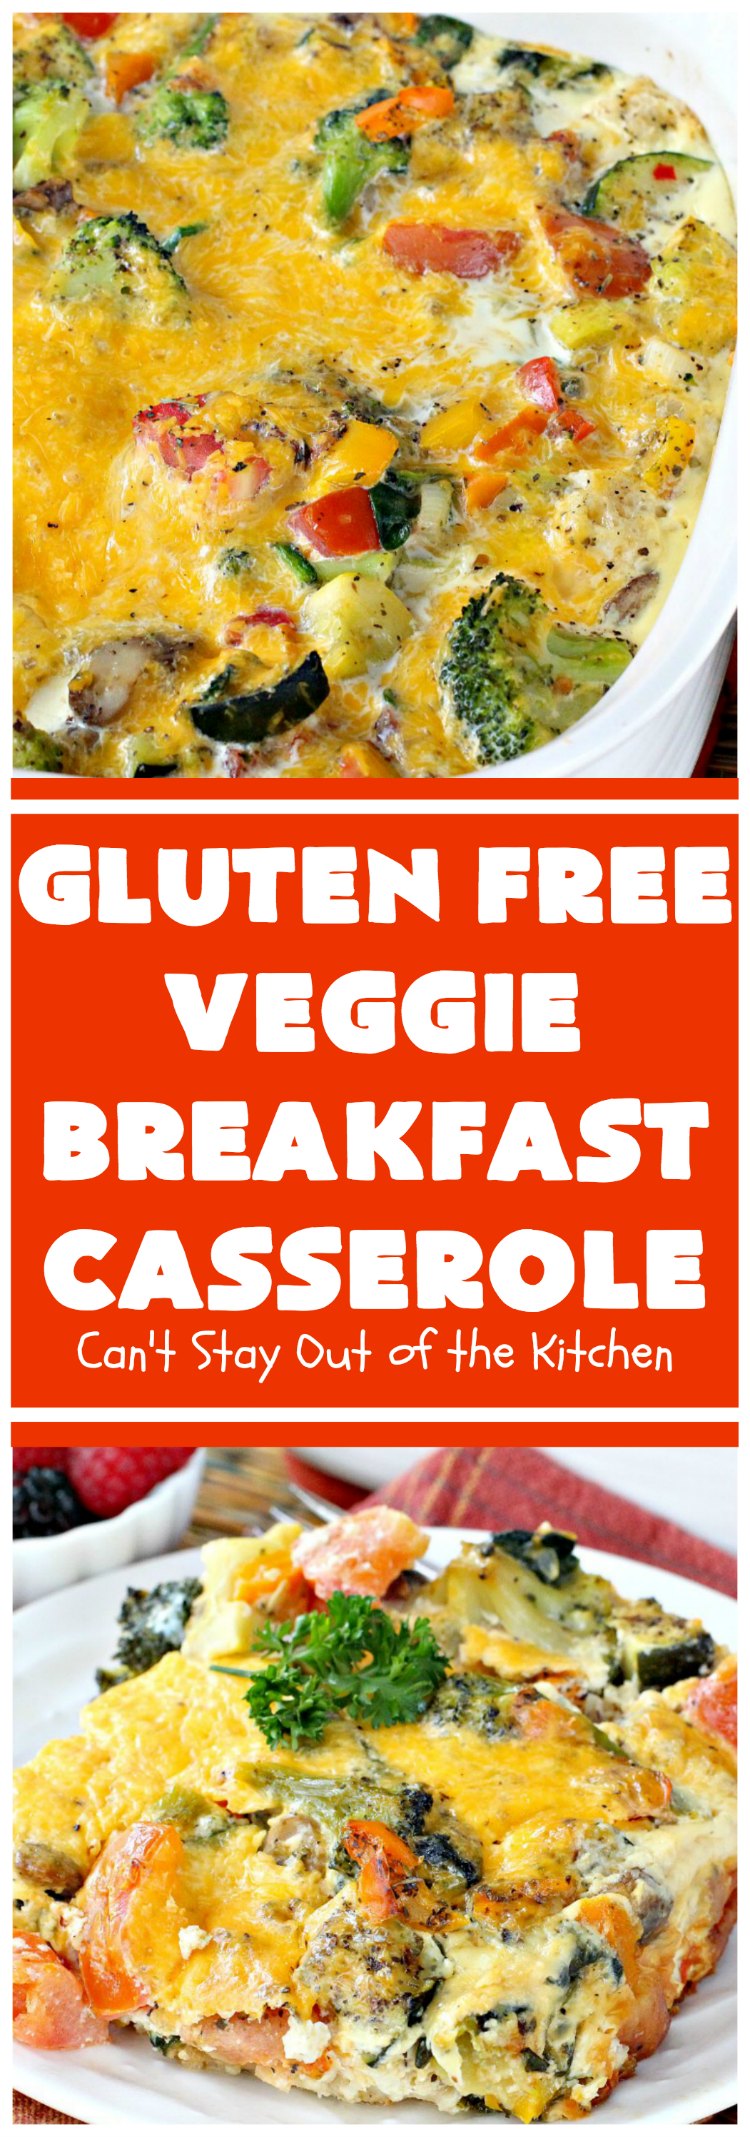 Gluten Free Veggie Breakfast Casserole | Can't Stay Out of the Kitchen